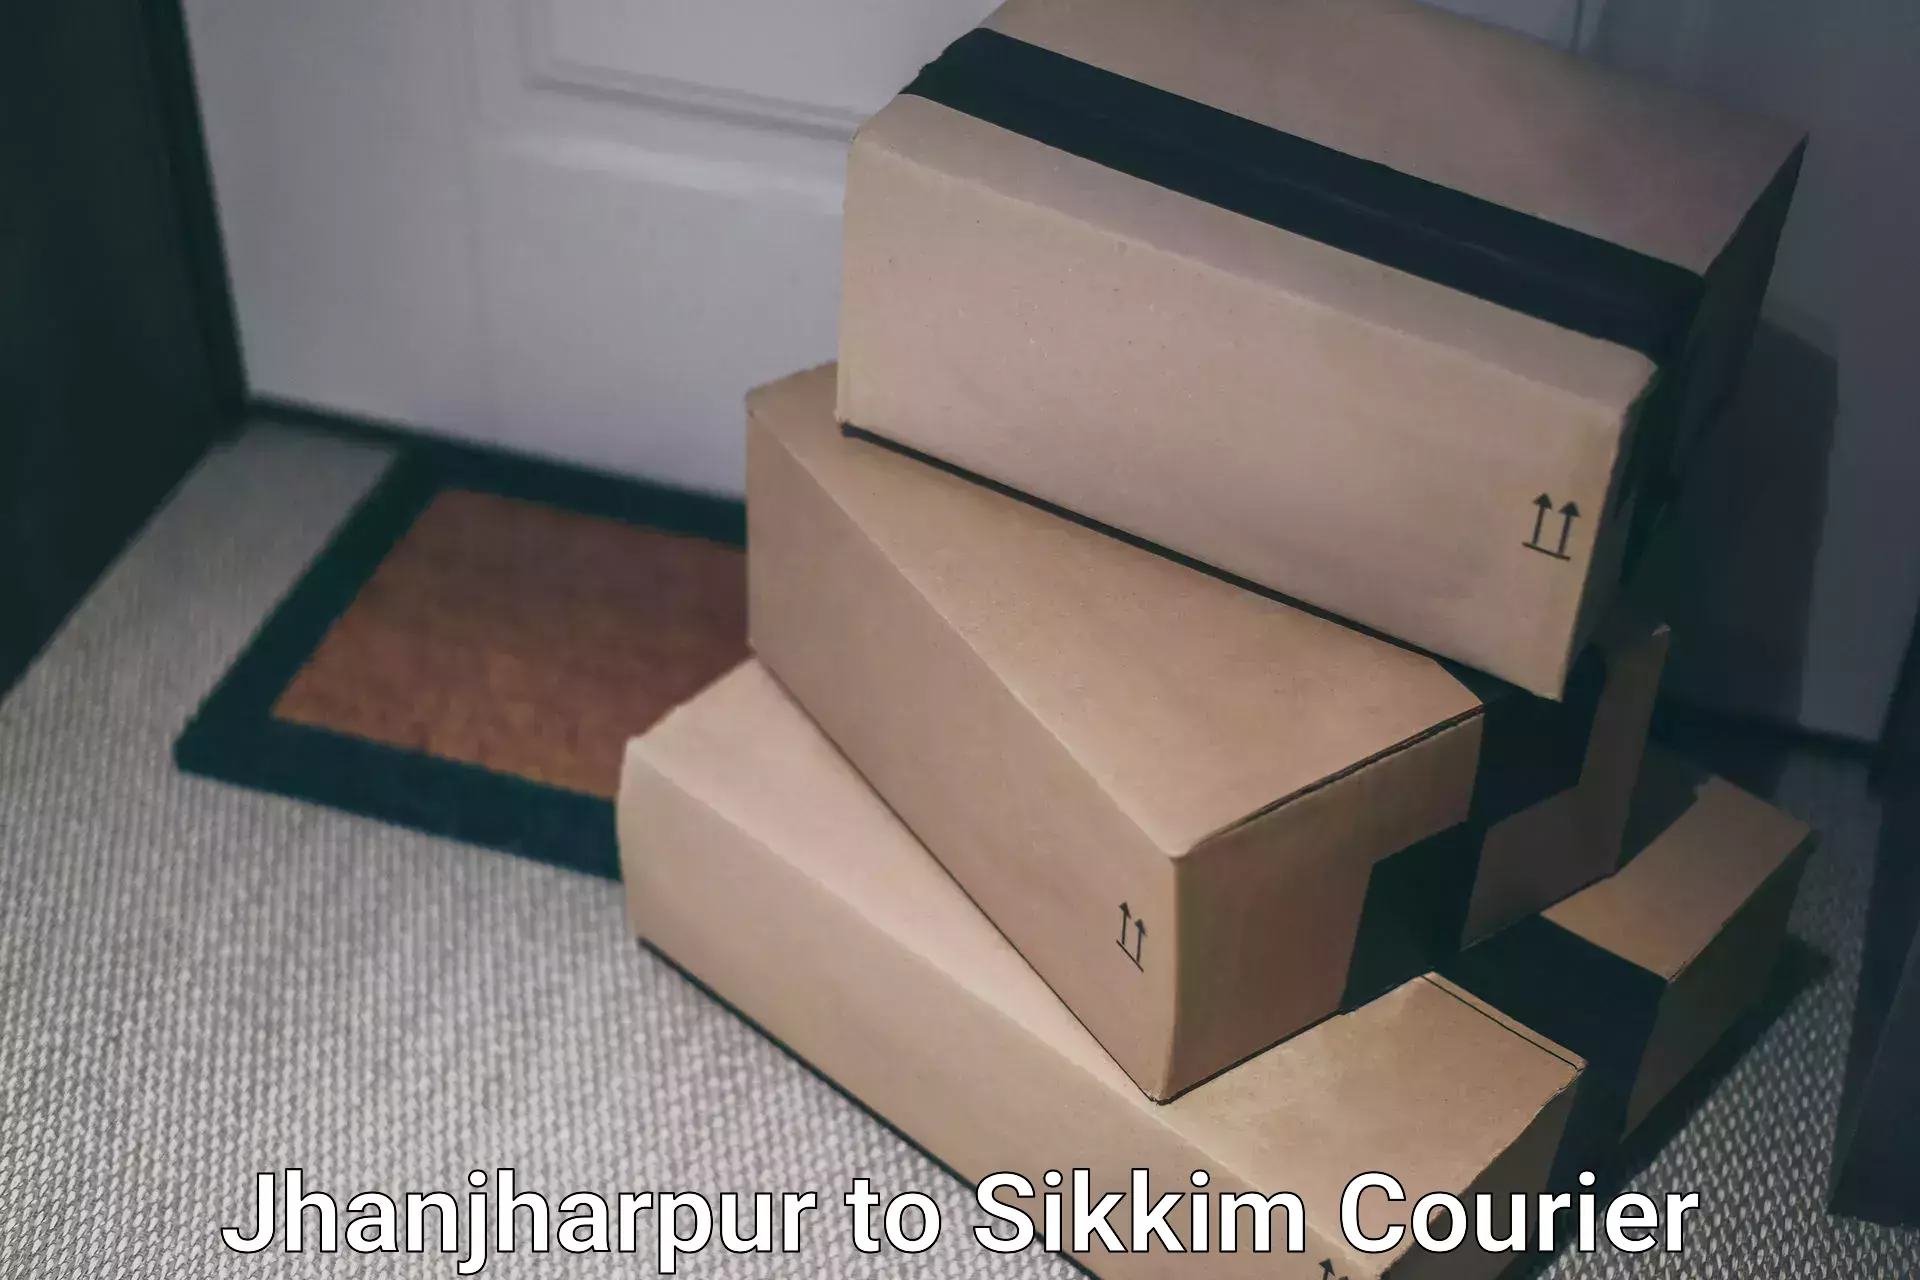 Same-day delivery options Jhanjharpur to East Sikkim